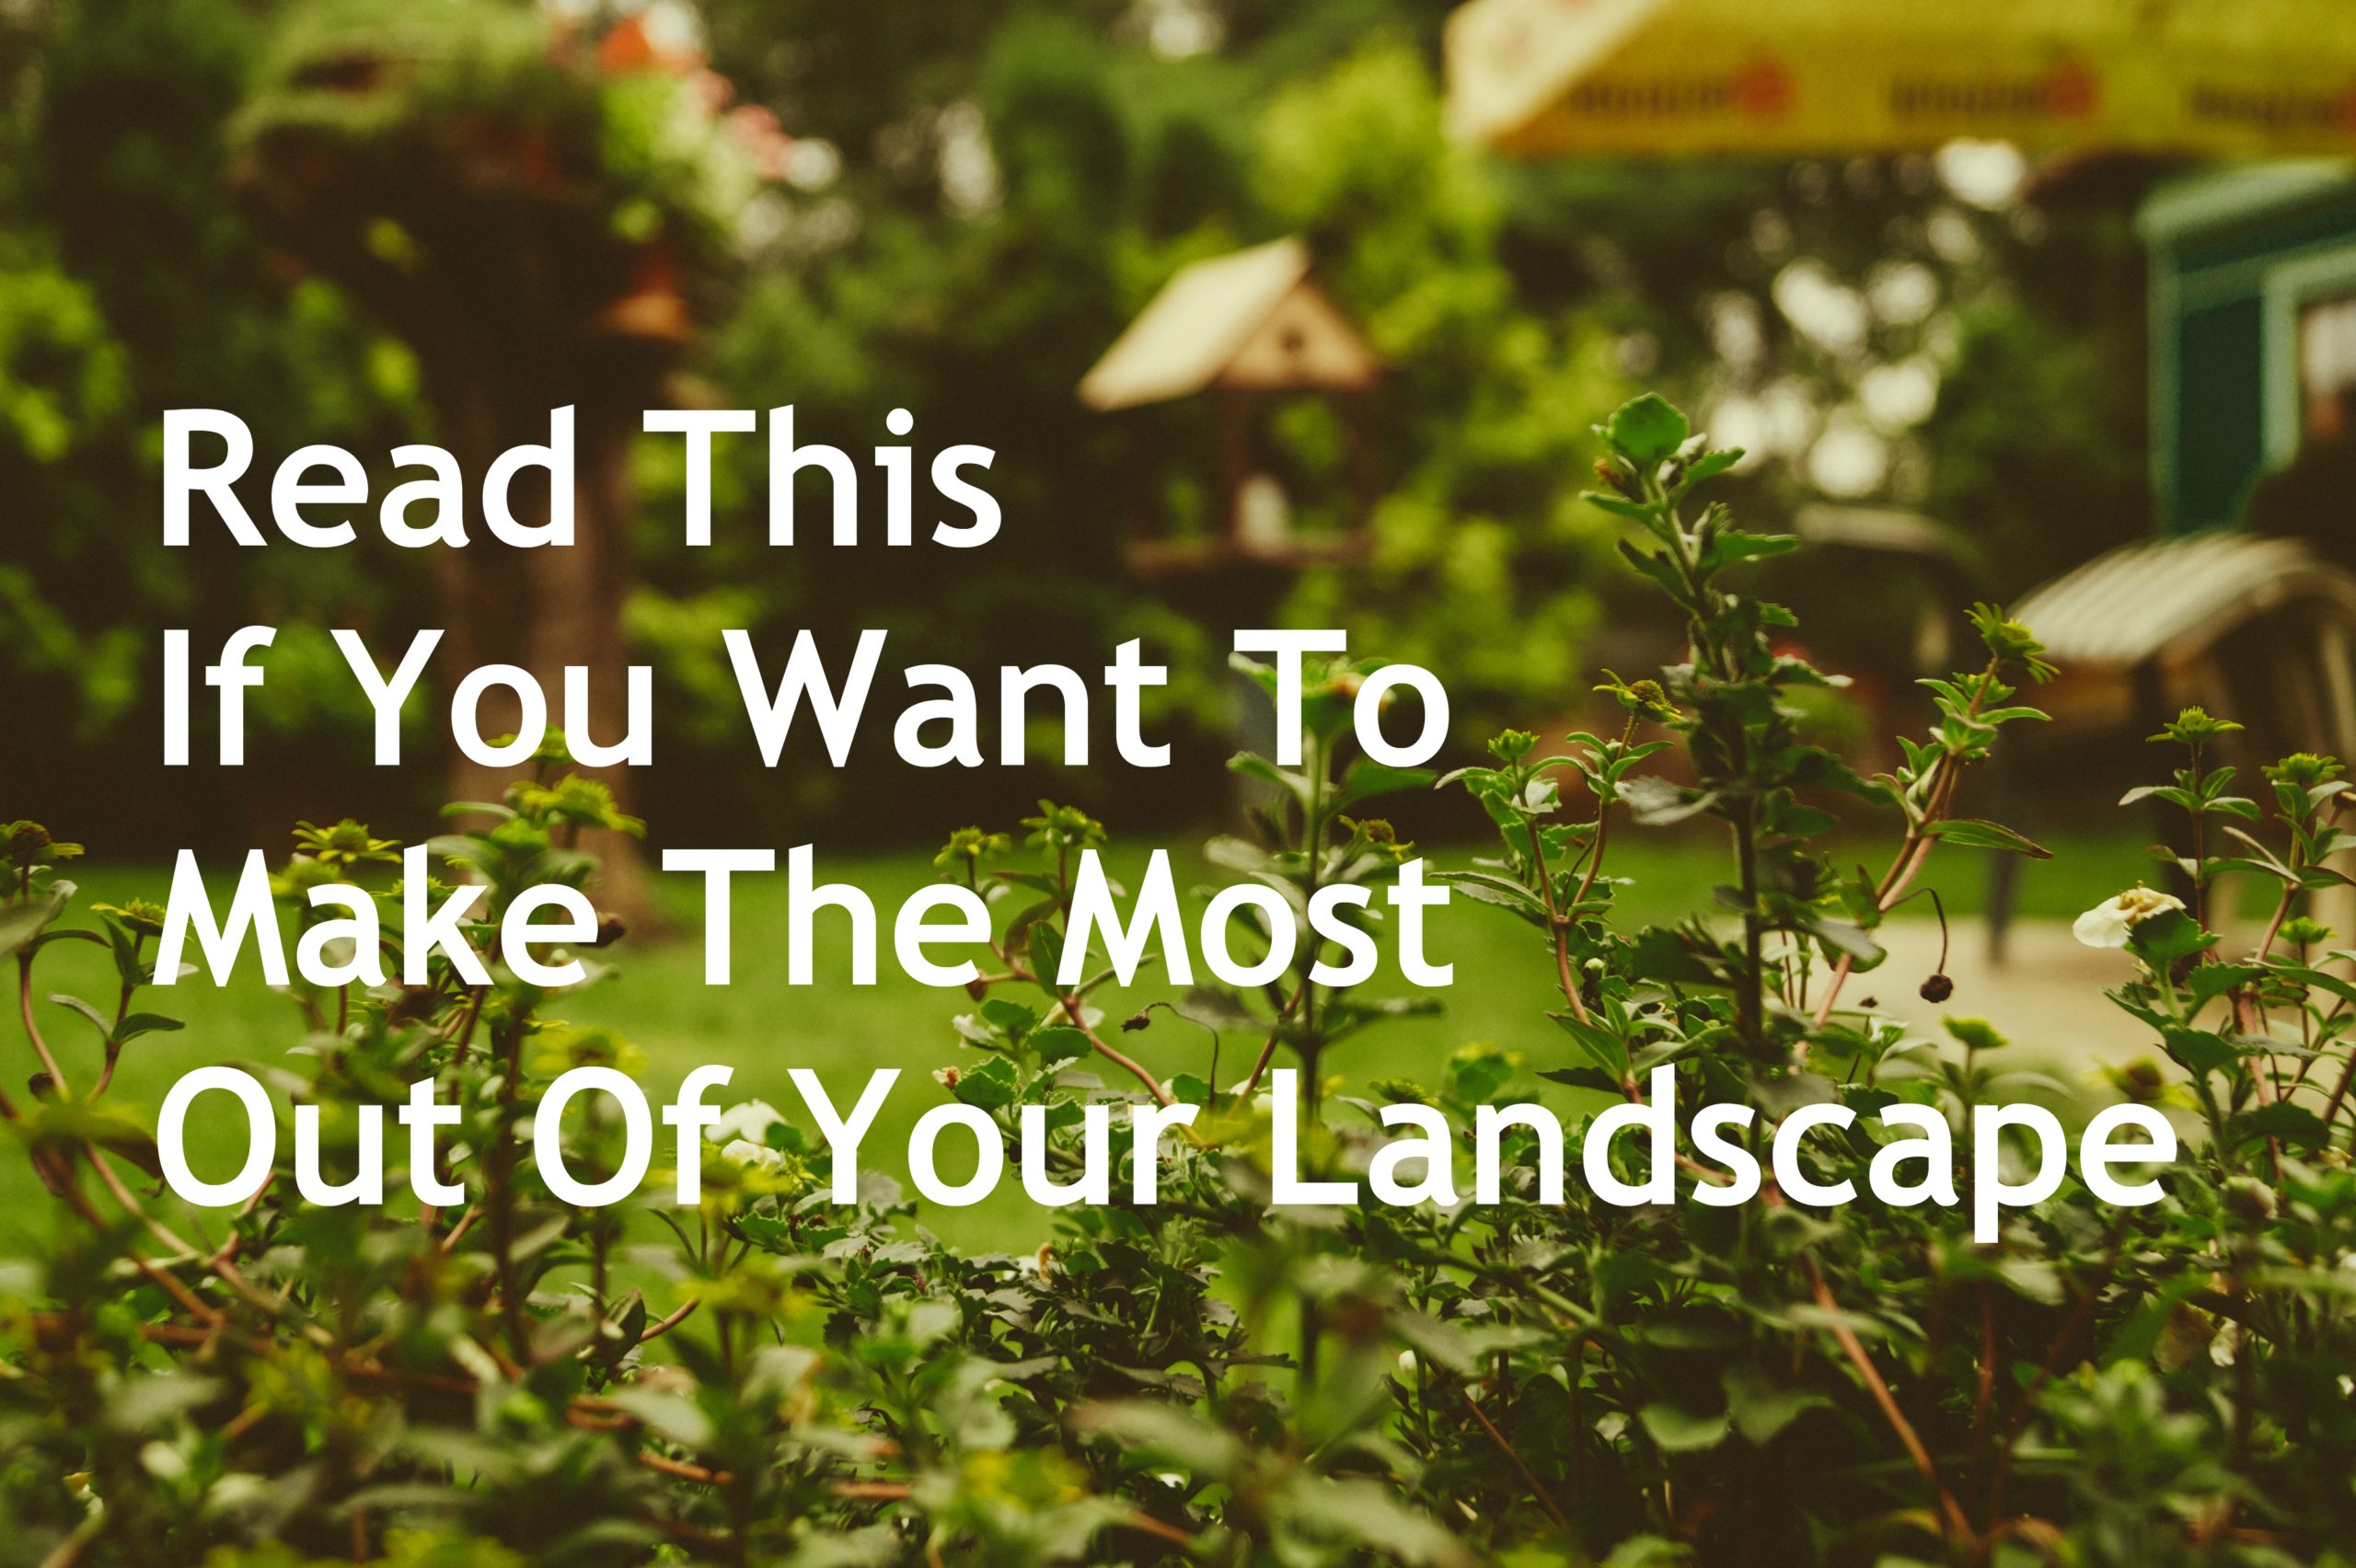 Read This If You Want To Make The Most Out Of Your Landscape scaled - Read This If You Want To Make The Most Out Of Your Landscape